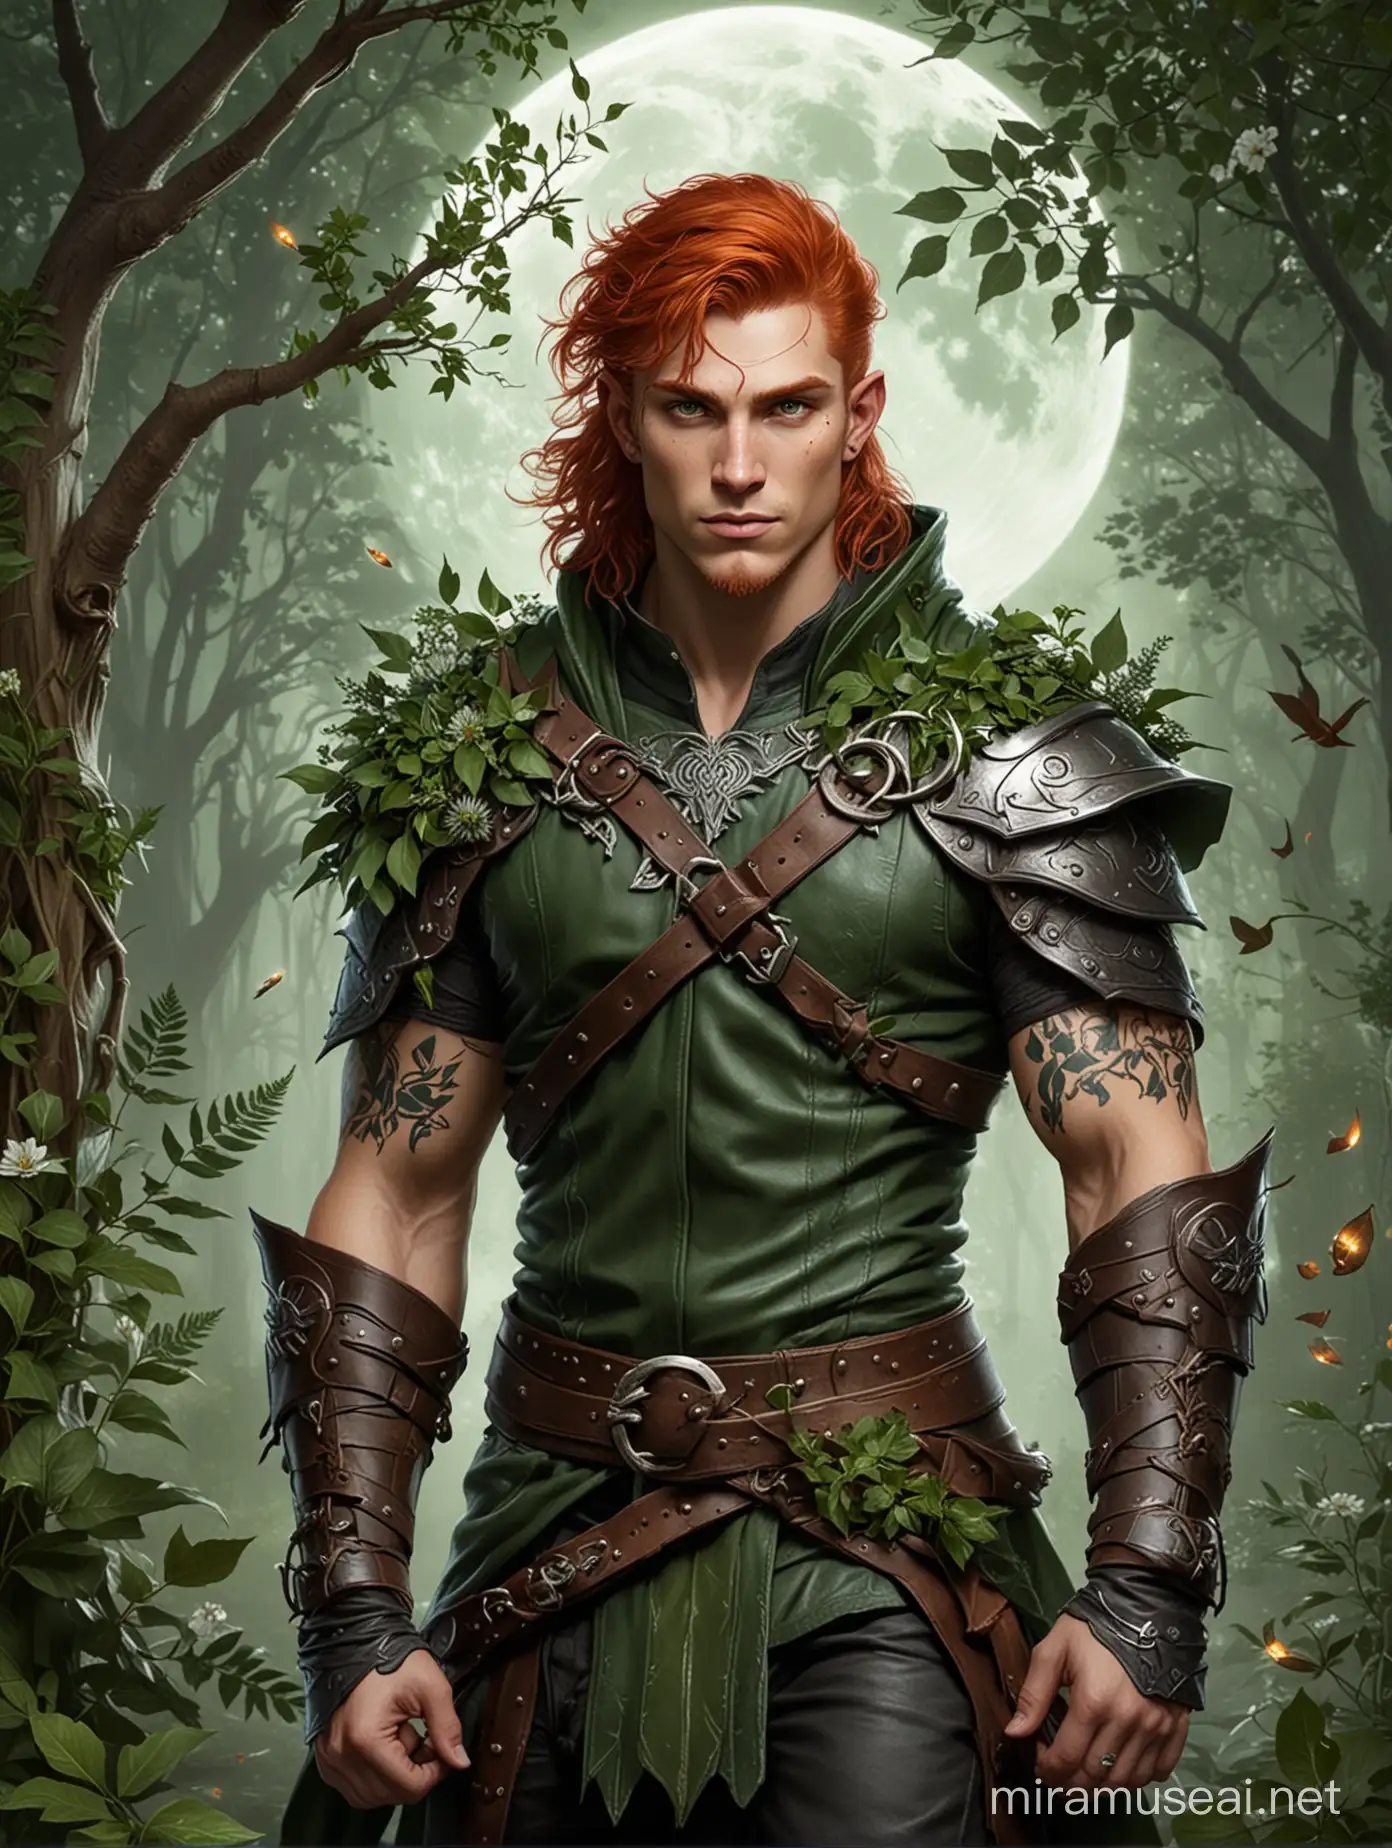 Redheaded Druid Dungeons and Dragons Character with NatureAdorned Leather Garments